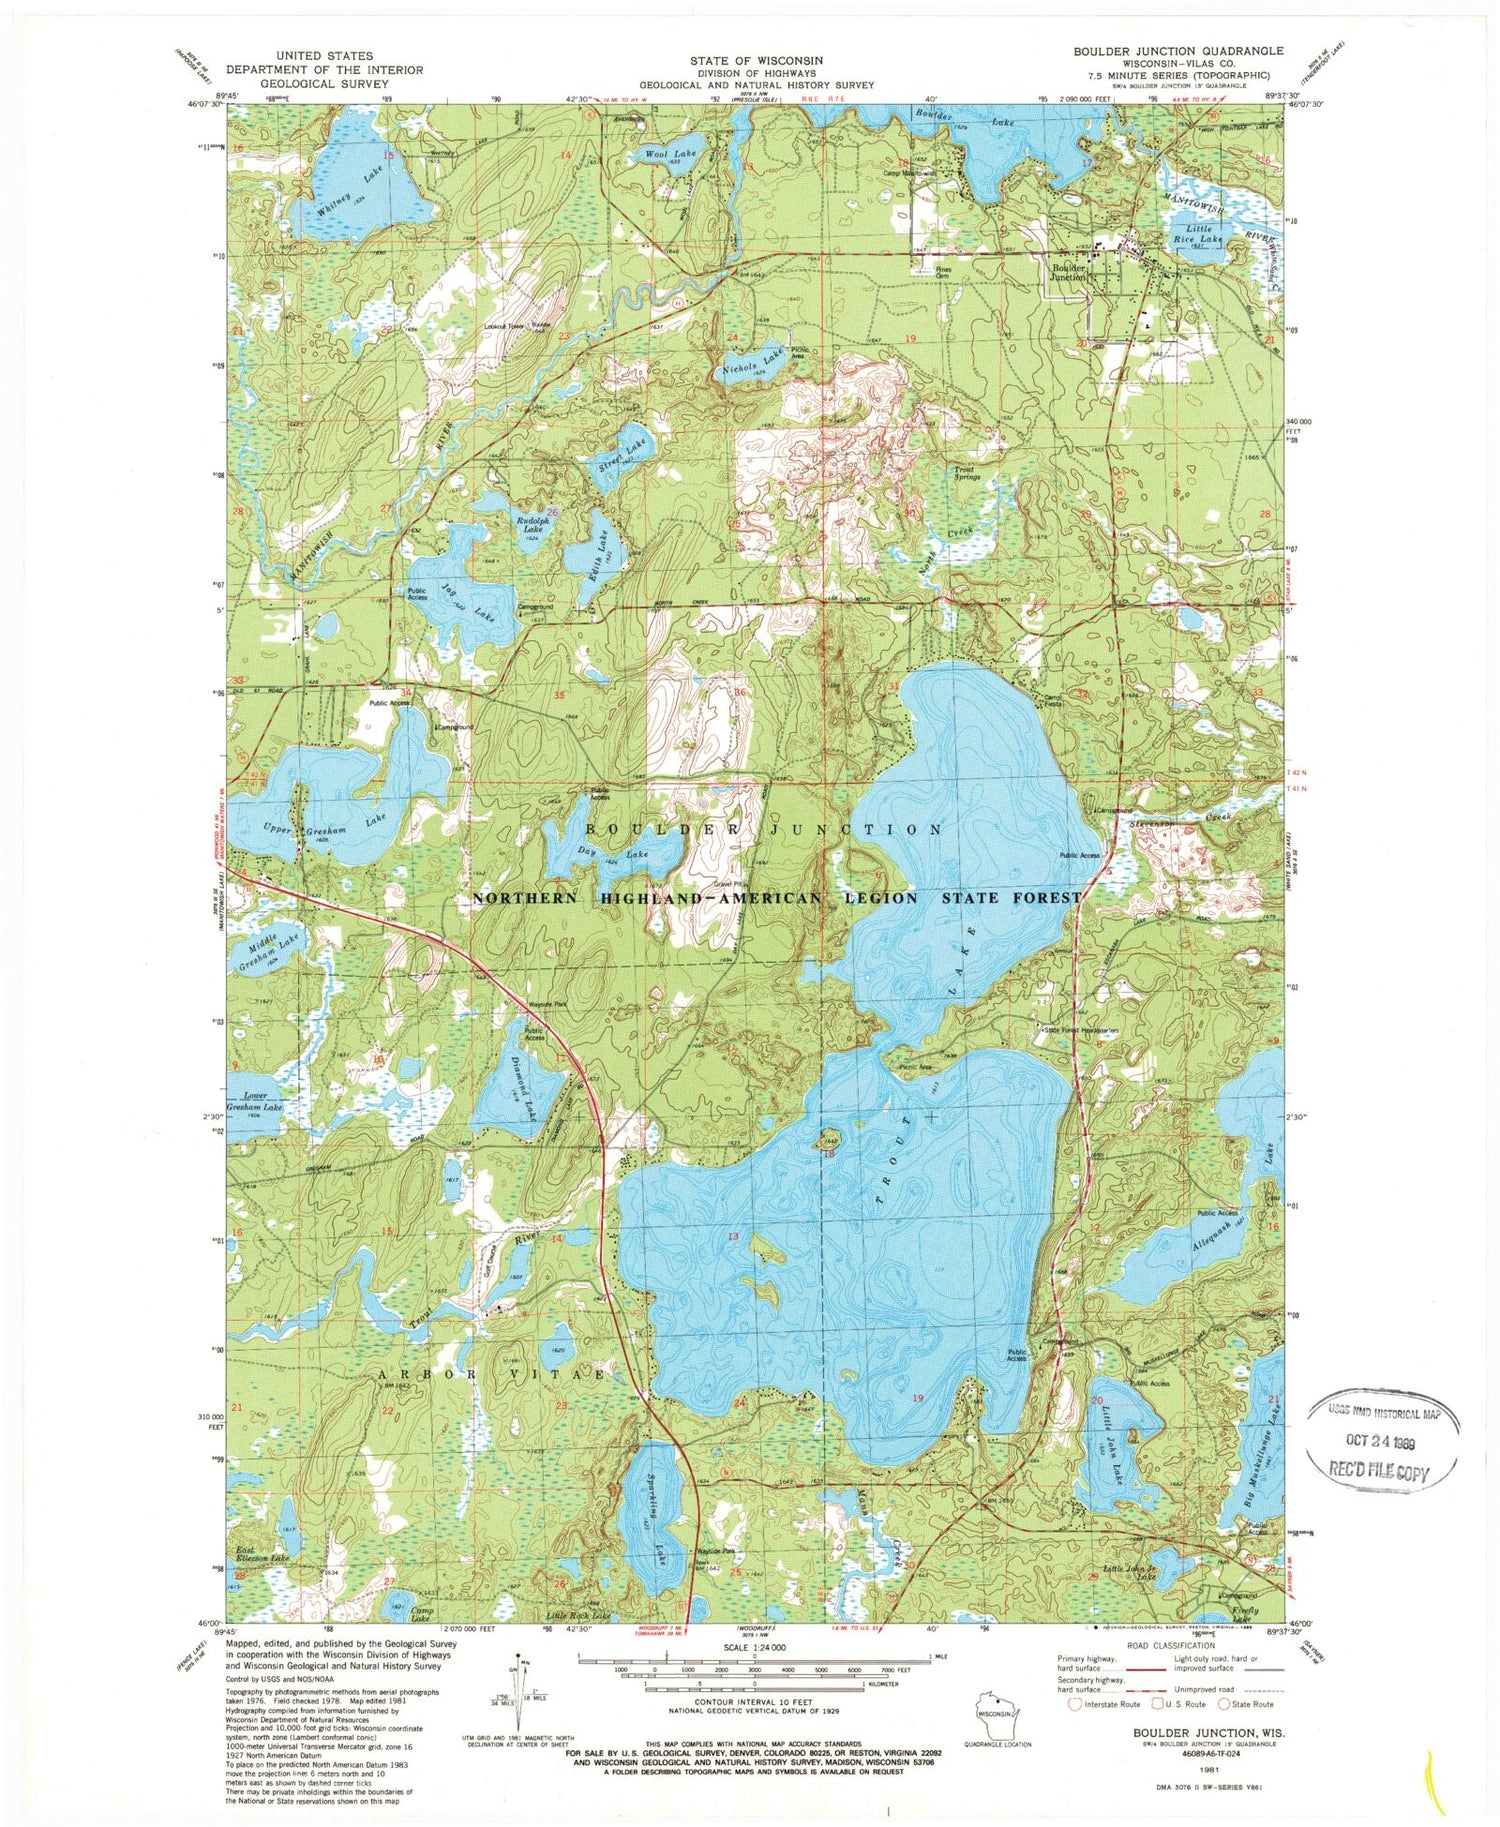 Classic USGS Boulder Junction Wisconsin 7.5'x7.5' Topo Map Image